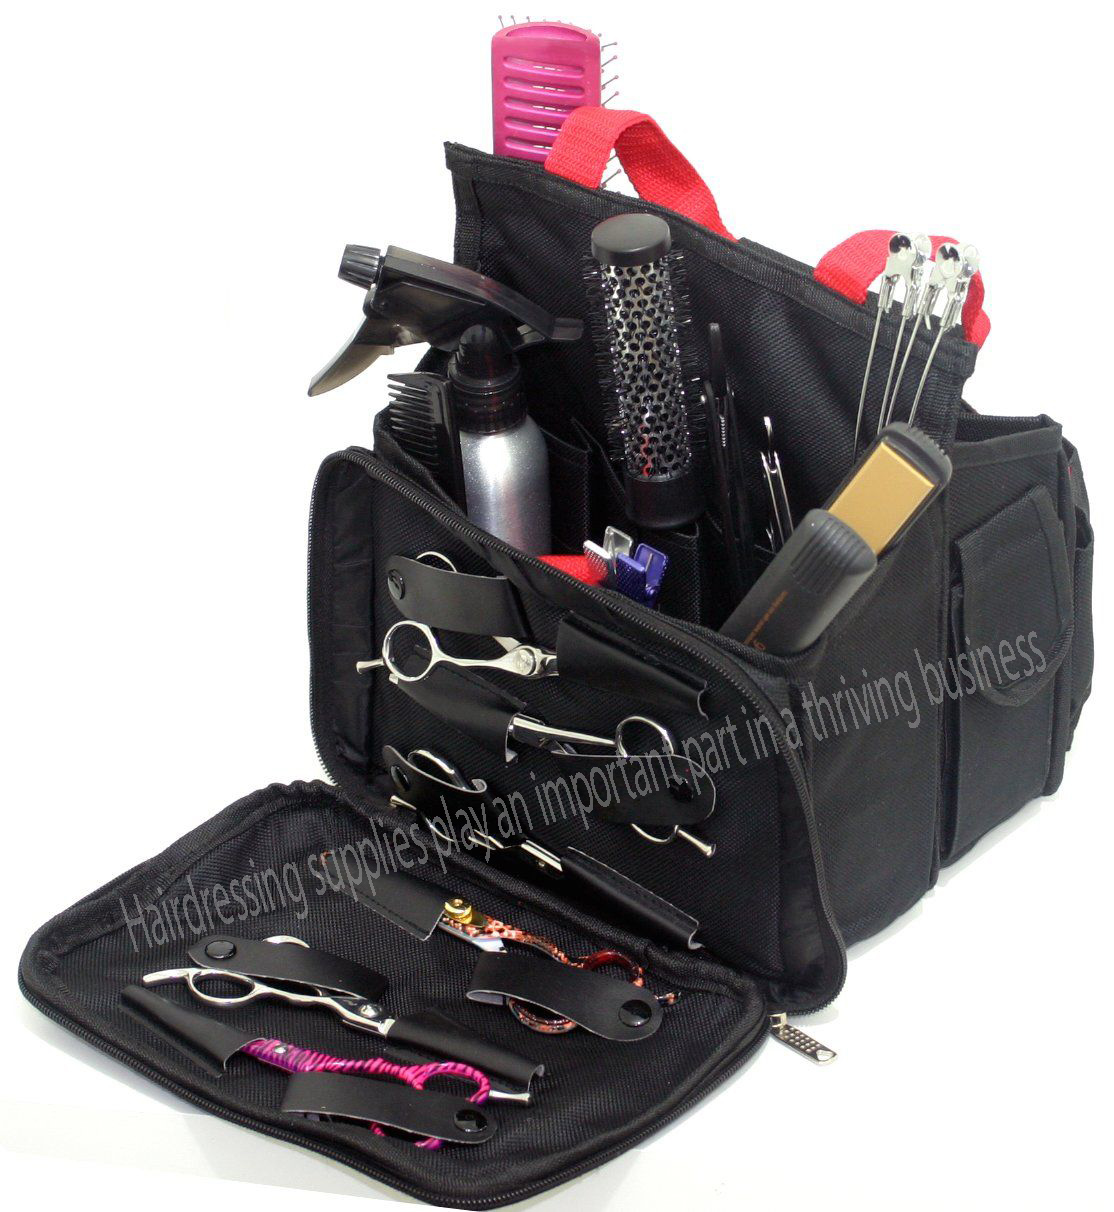 Hairdressing supplies play an important part in a thriving business